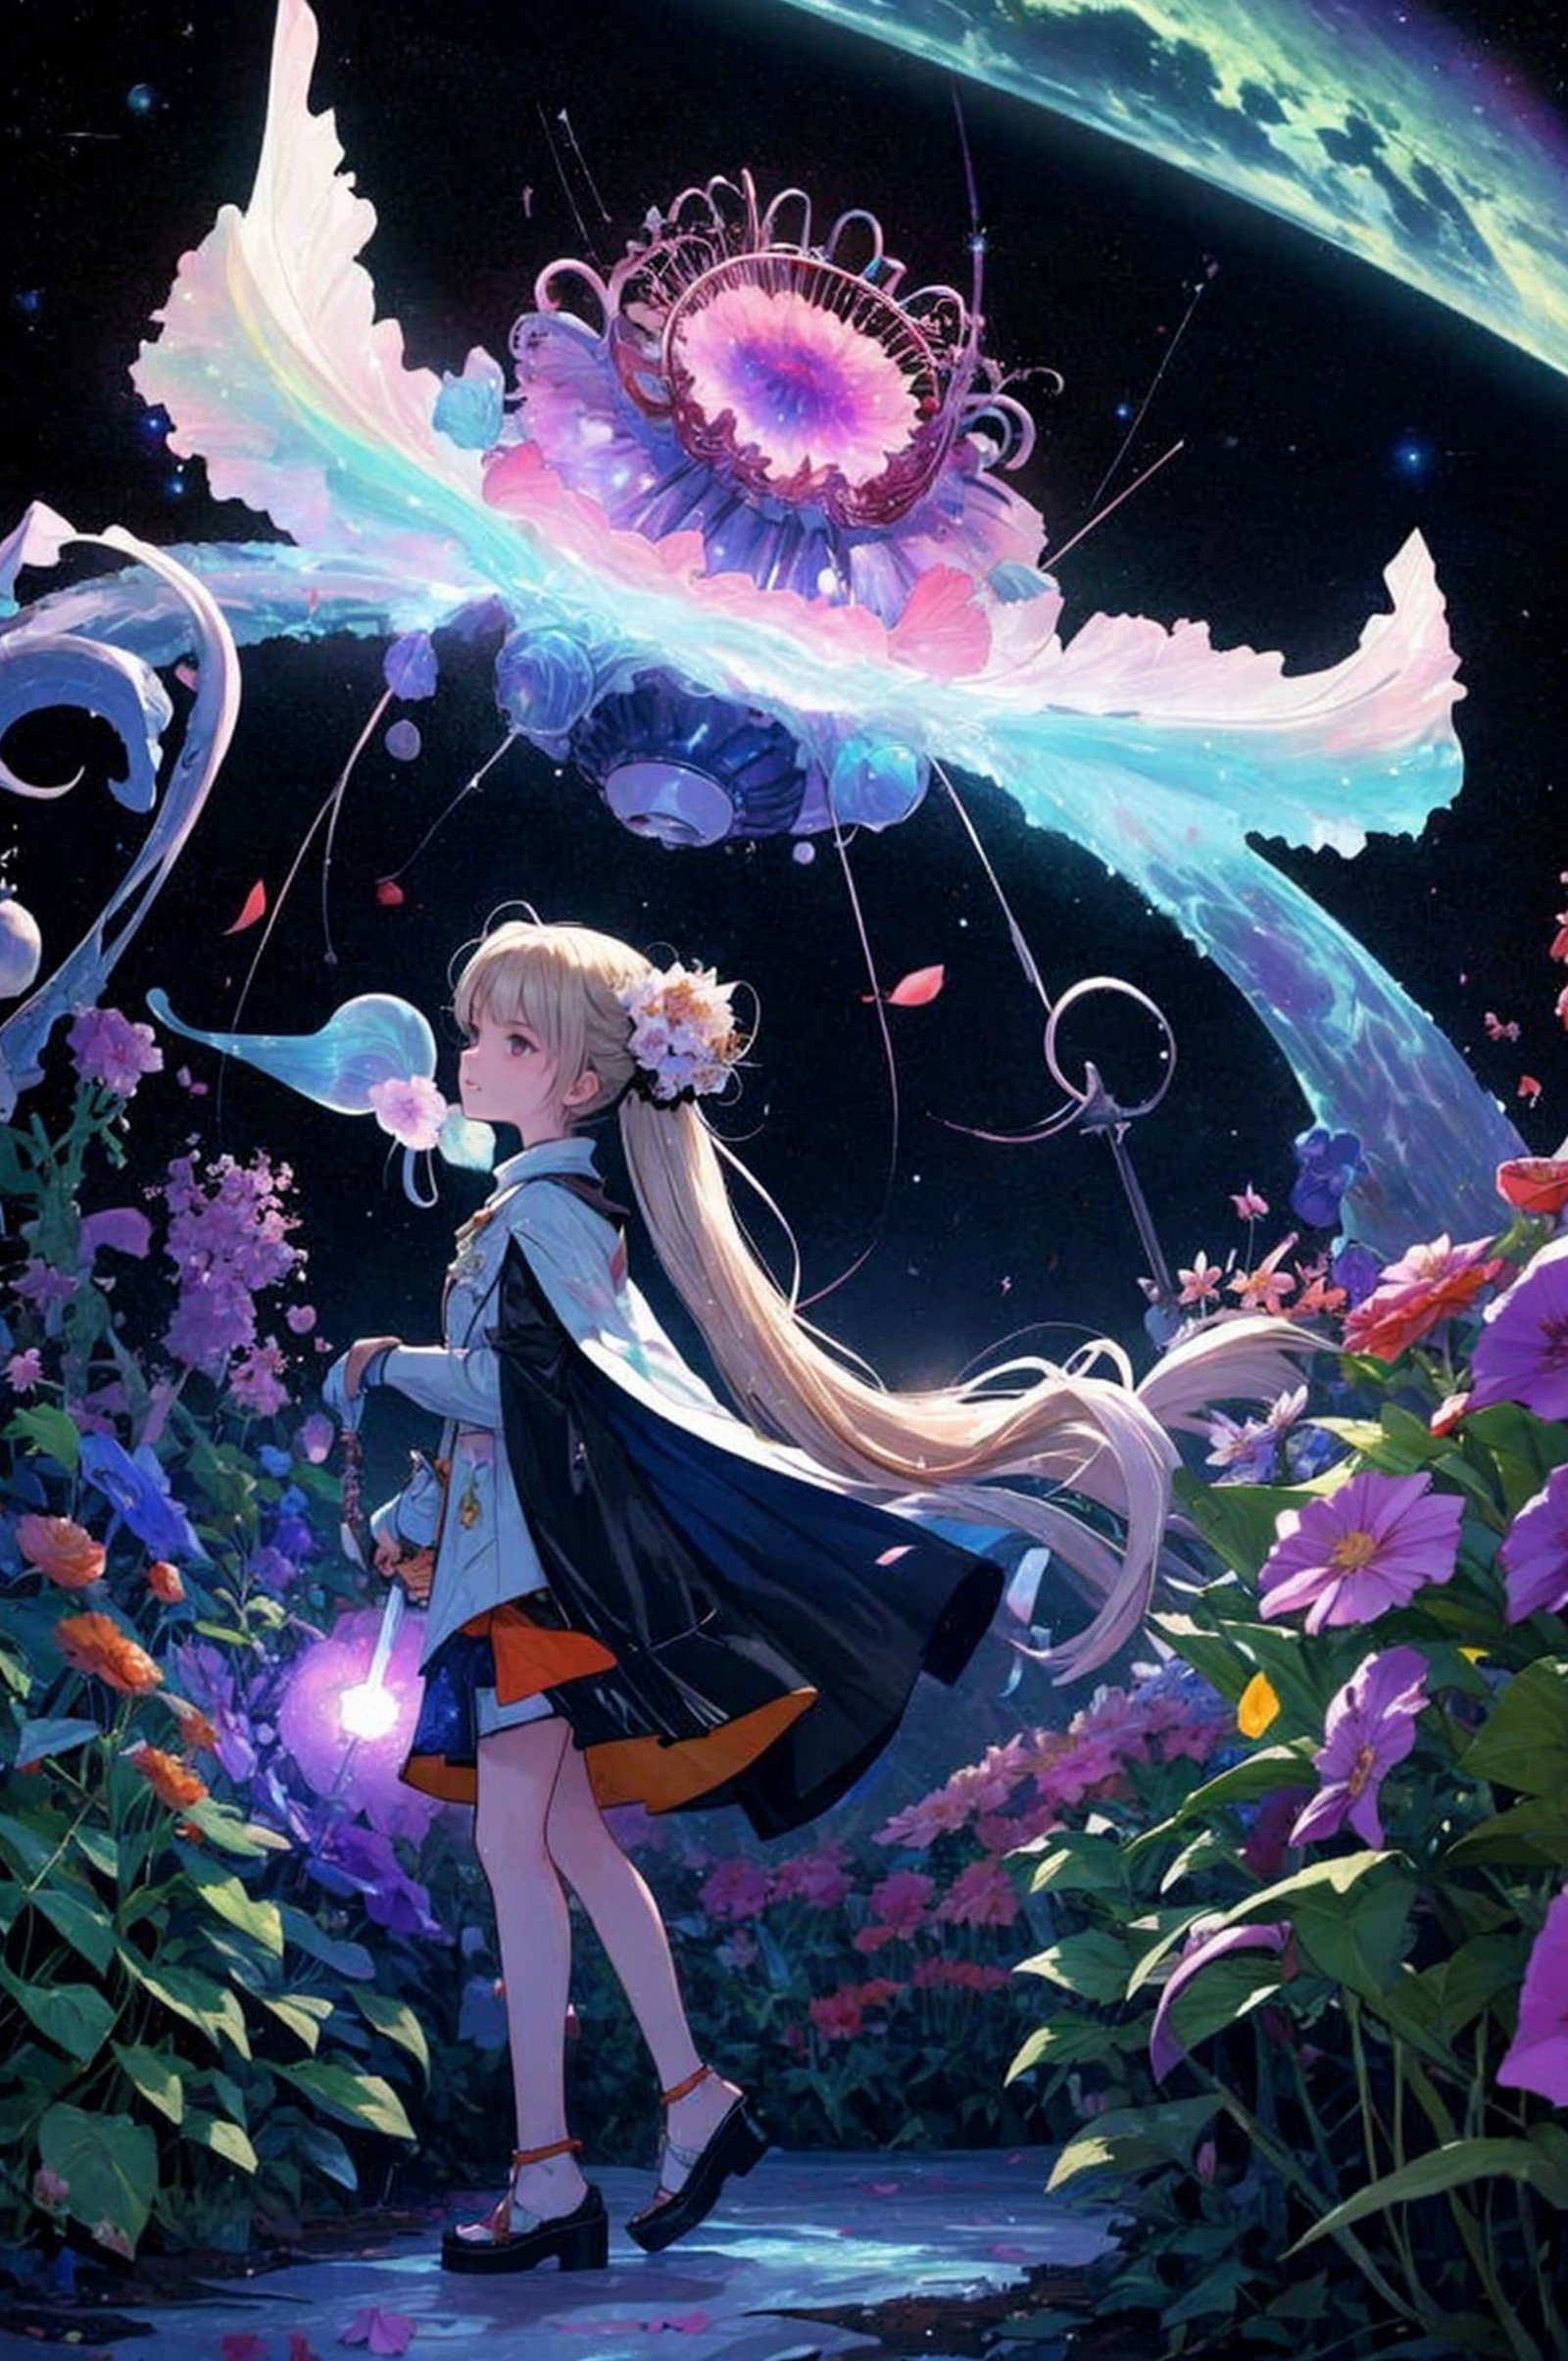 In the enigmatic embrace of the Garden-Sprinkler Nebula,where cosmic winds whisper secrets,alien flora unfurl their otherworldly petals. Let us wander through this celestial garden,where nebulae bloom like stardust-kissed blossoms,